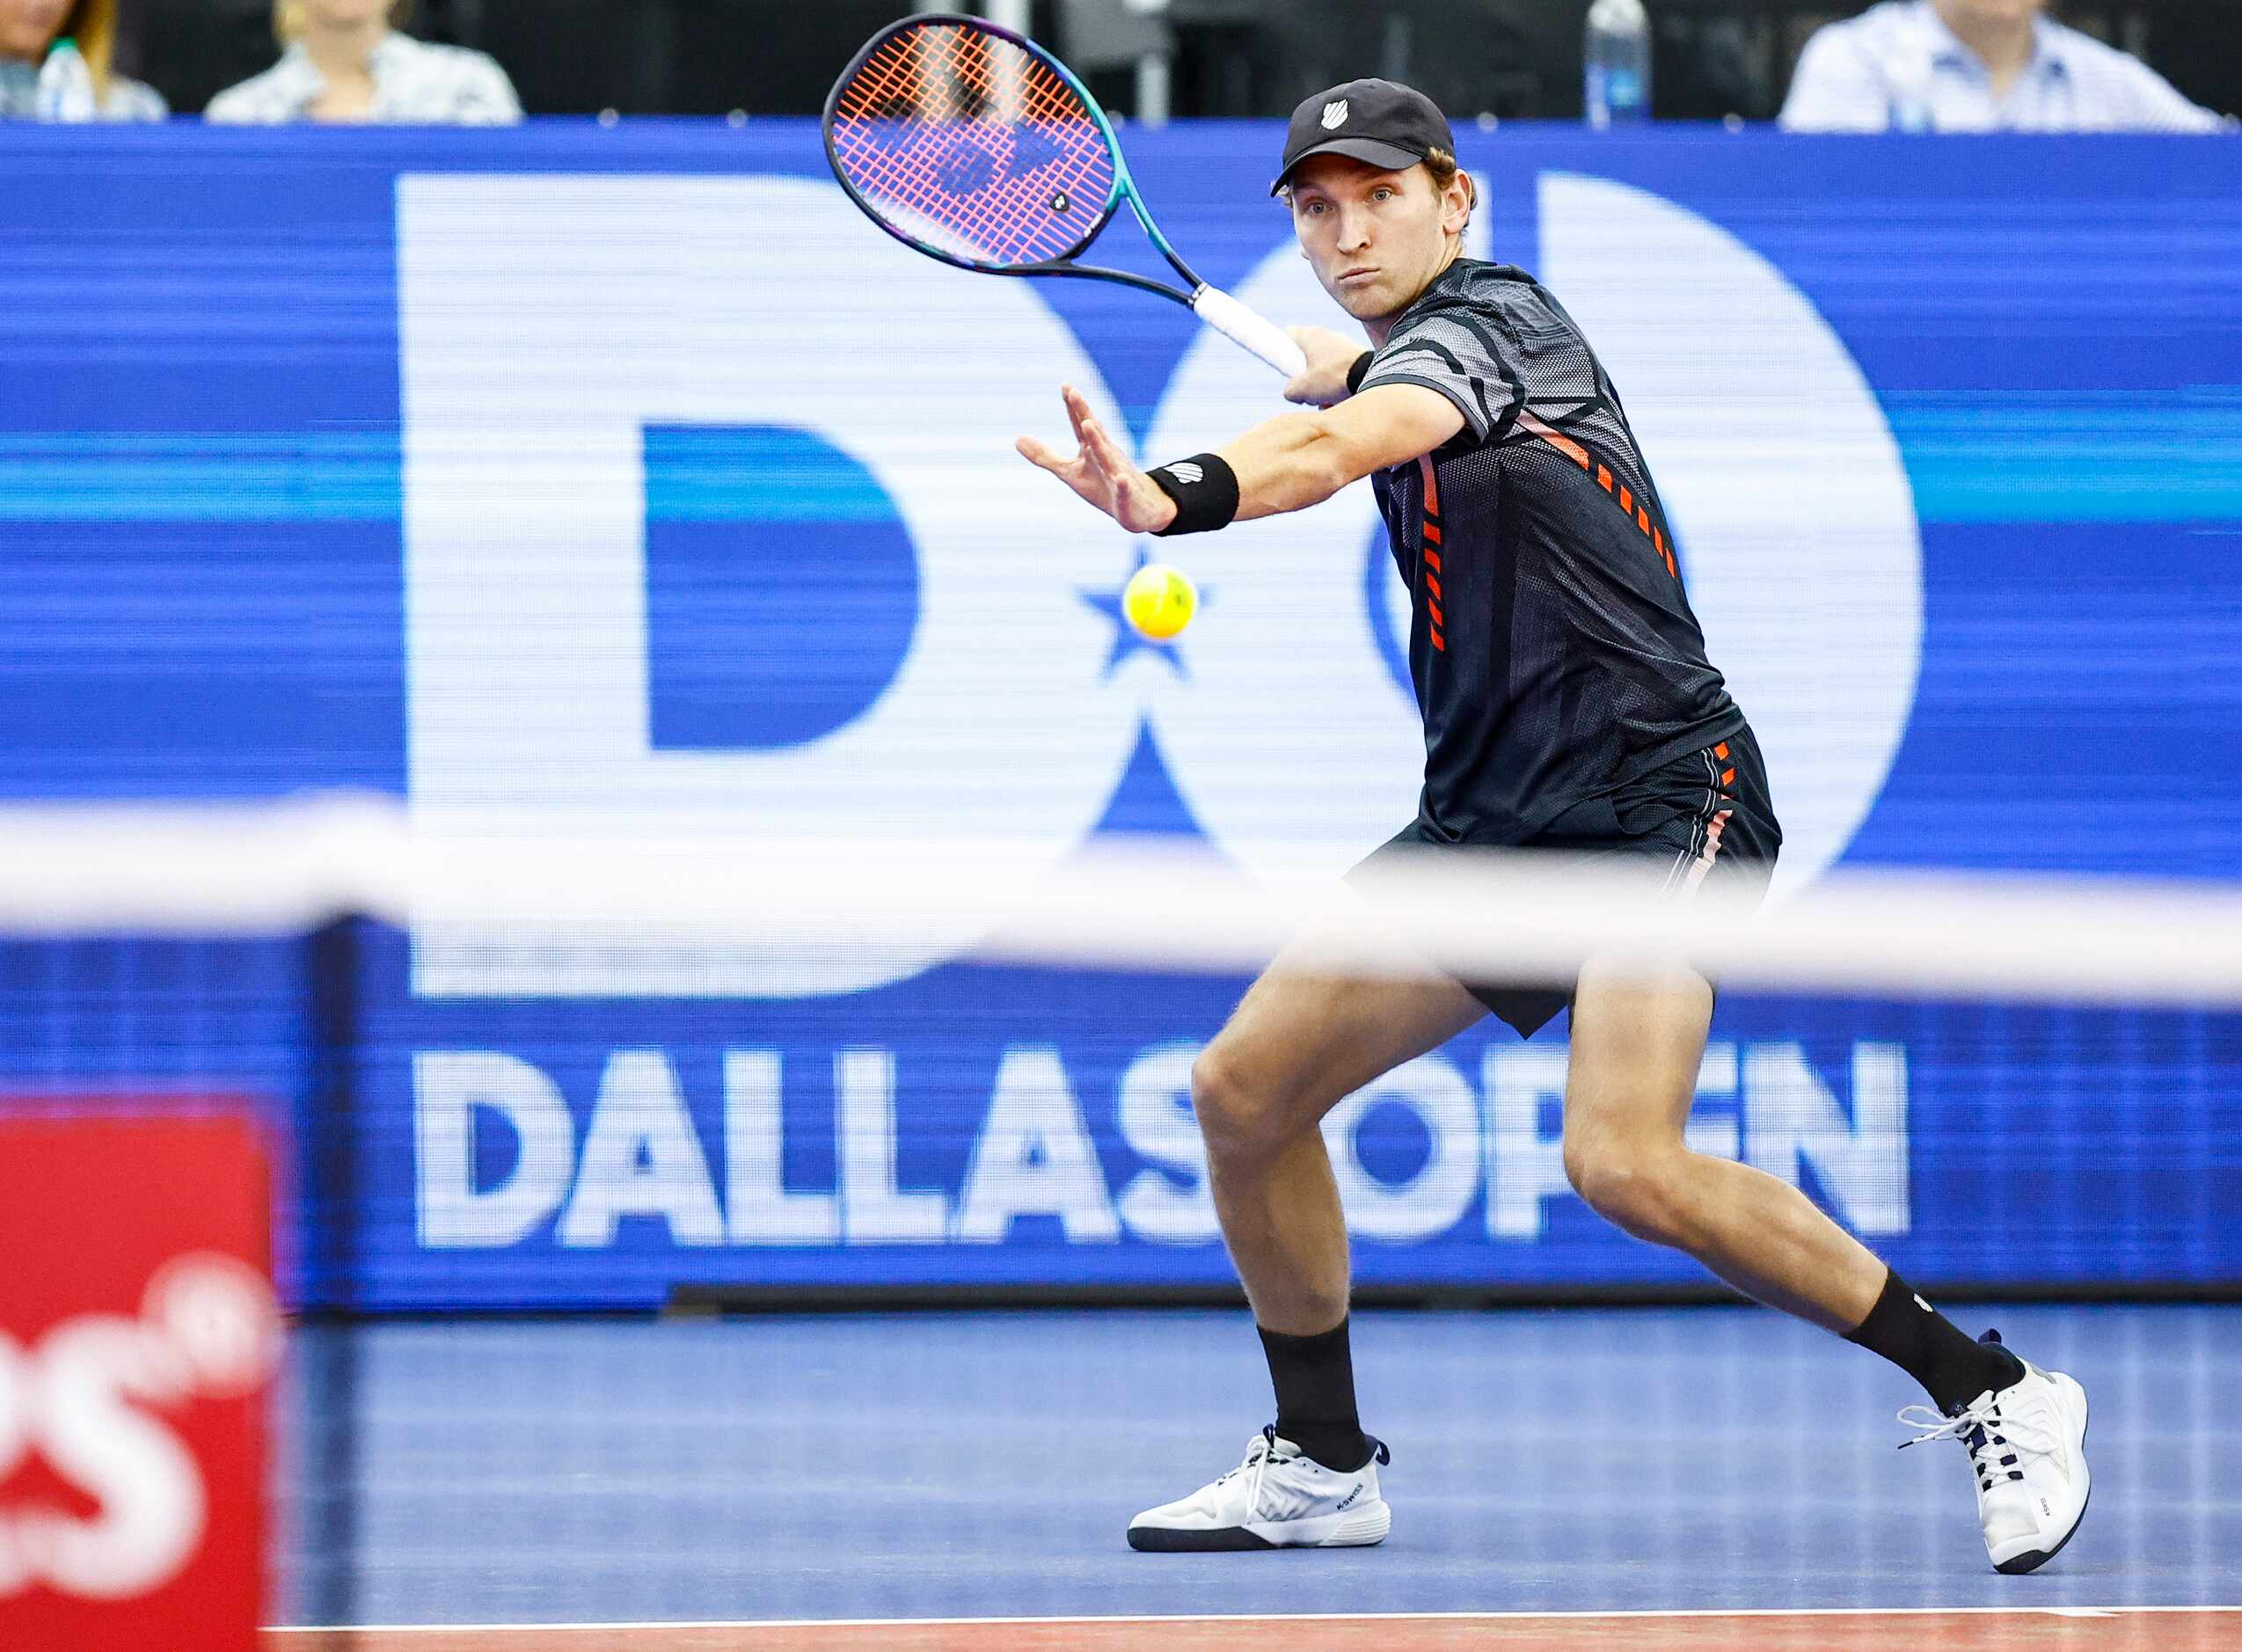 Mitchell Krueger, a Fort Worth native, returns the ball in a match against Yoshihito...